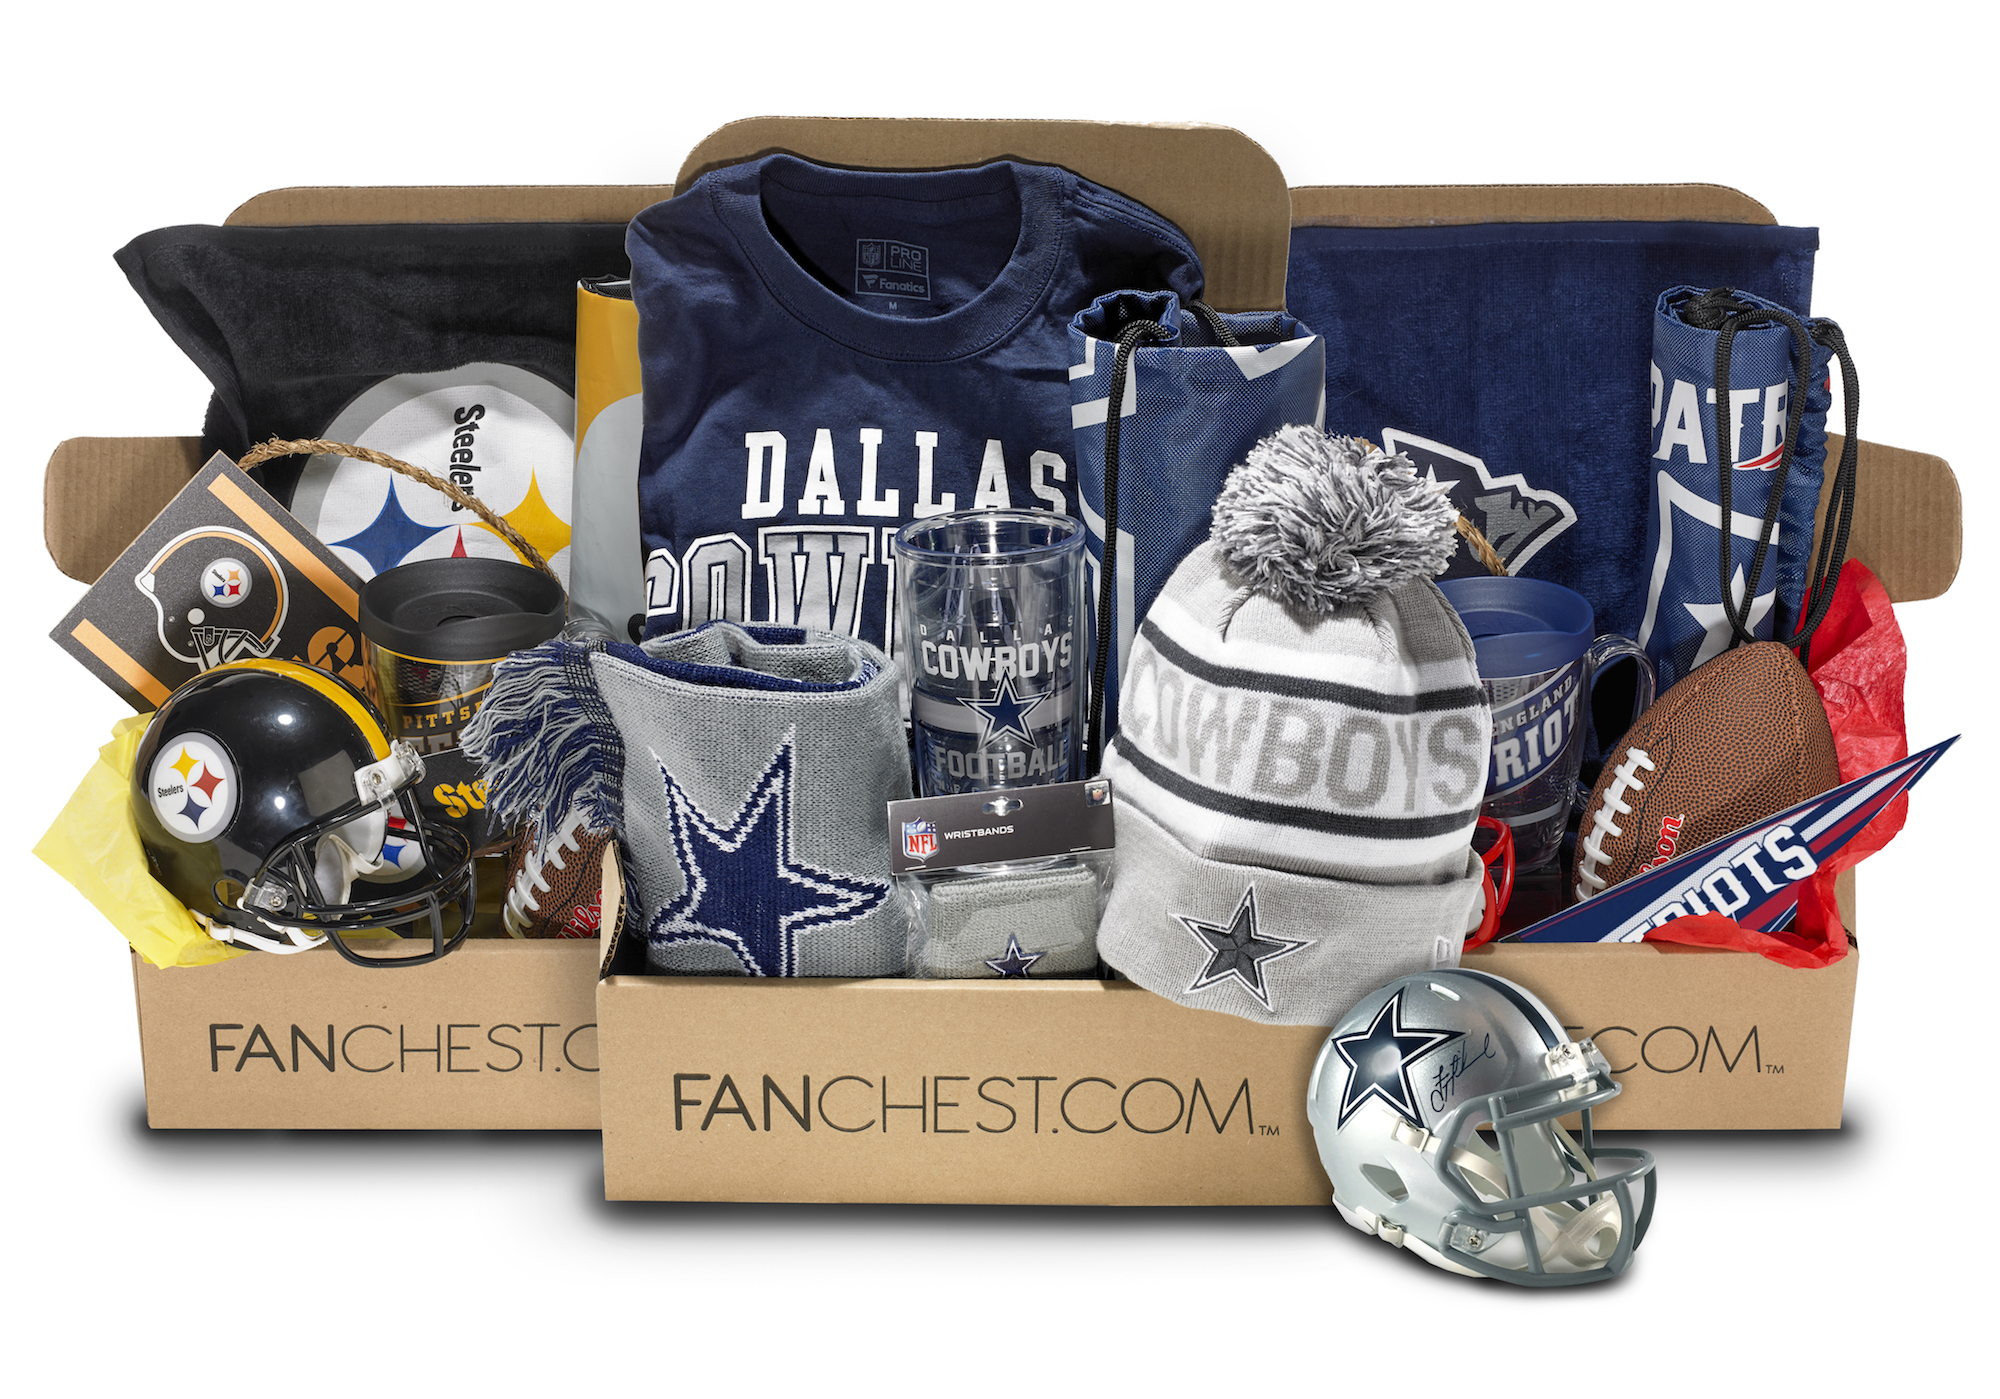 Fanchest raises $4M in seed funding to become the best gift for sports fans